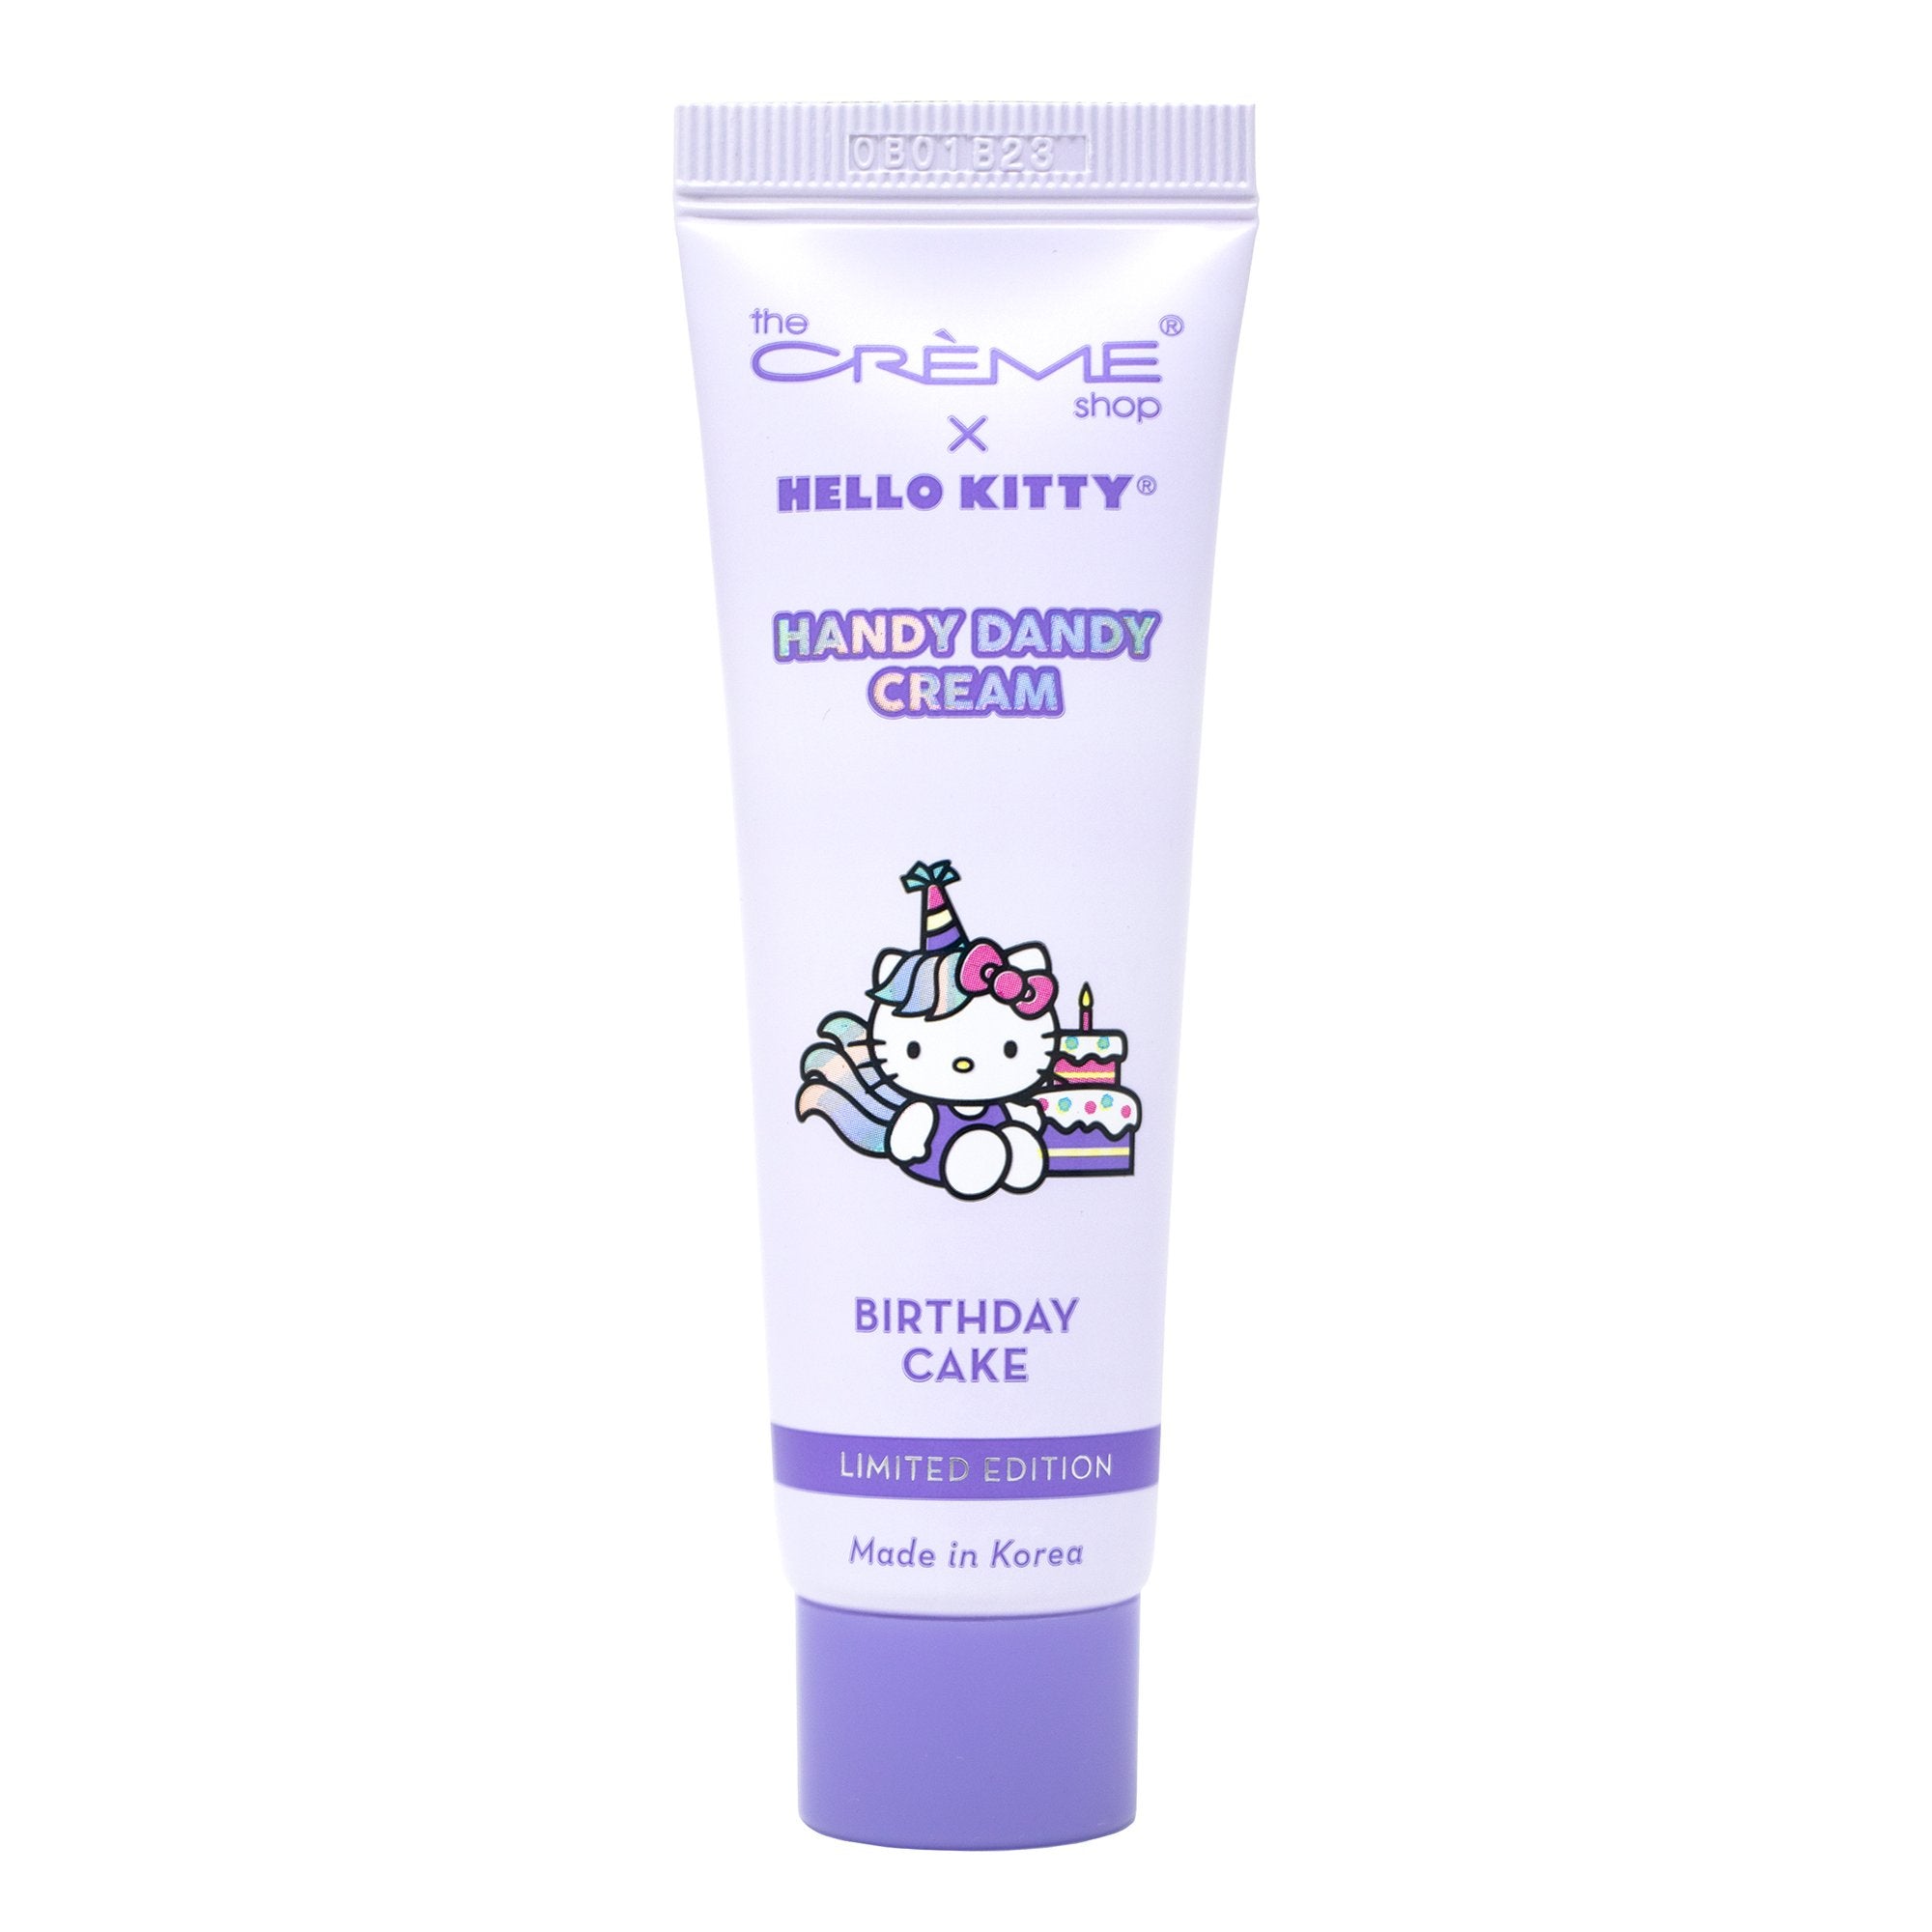 The Crème Shop x Hello Kitty Handy Dandy Cream (Limited Edition) | Birthday Cake (Travel-Sized) - The Crème Shop